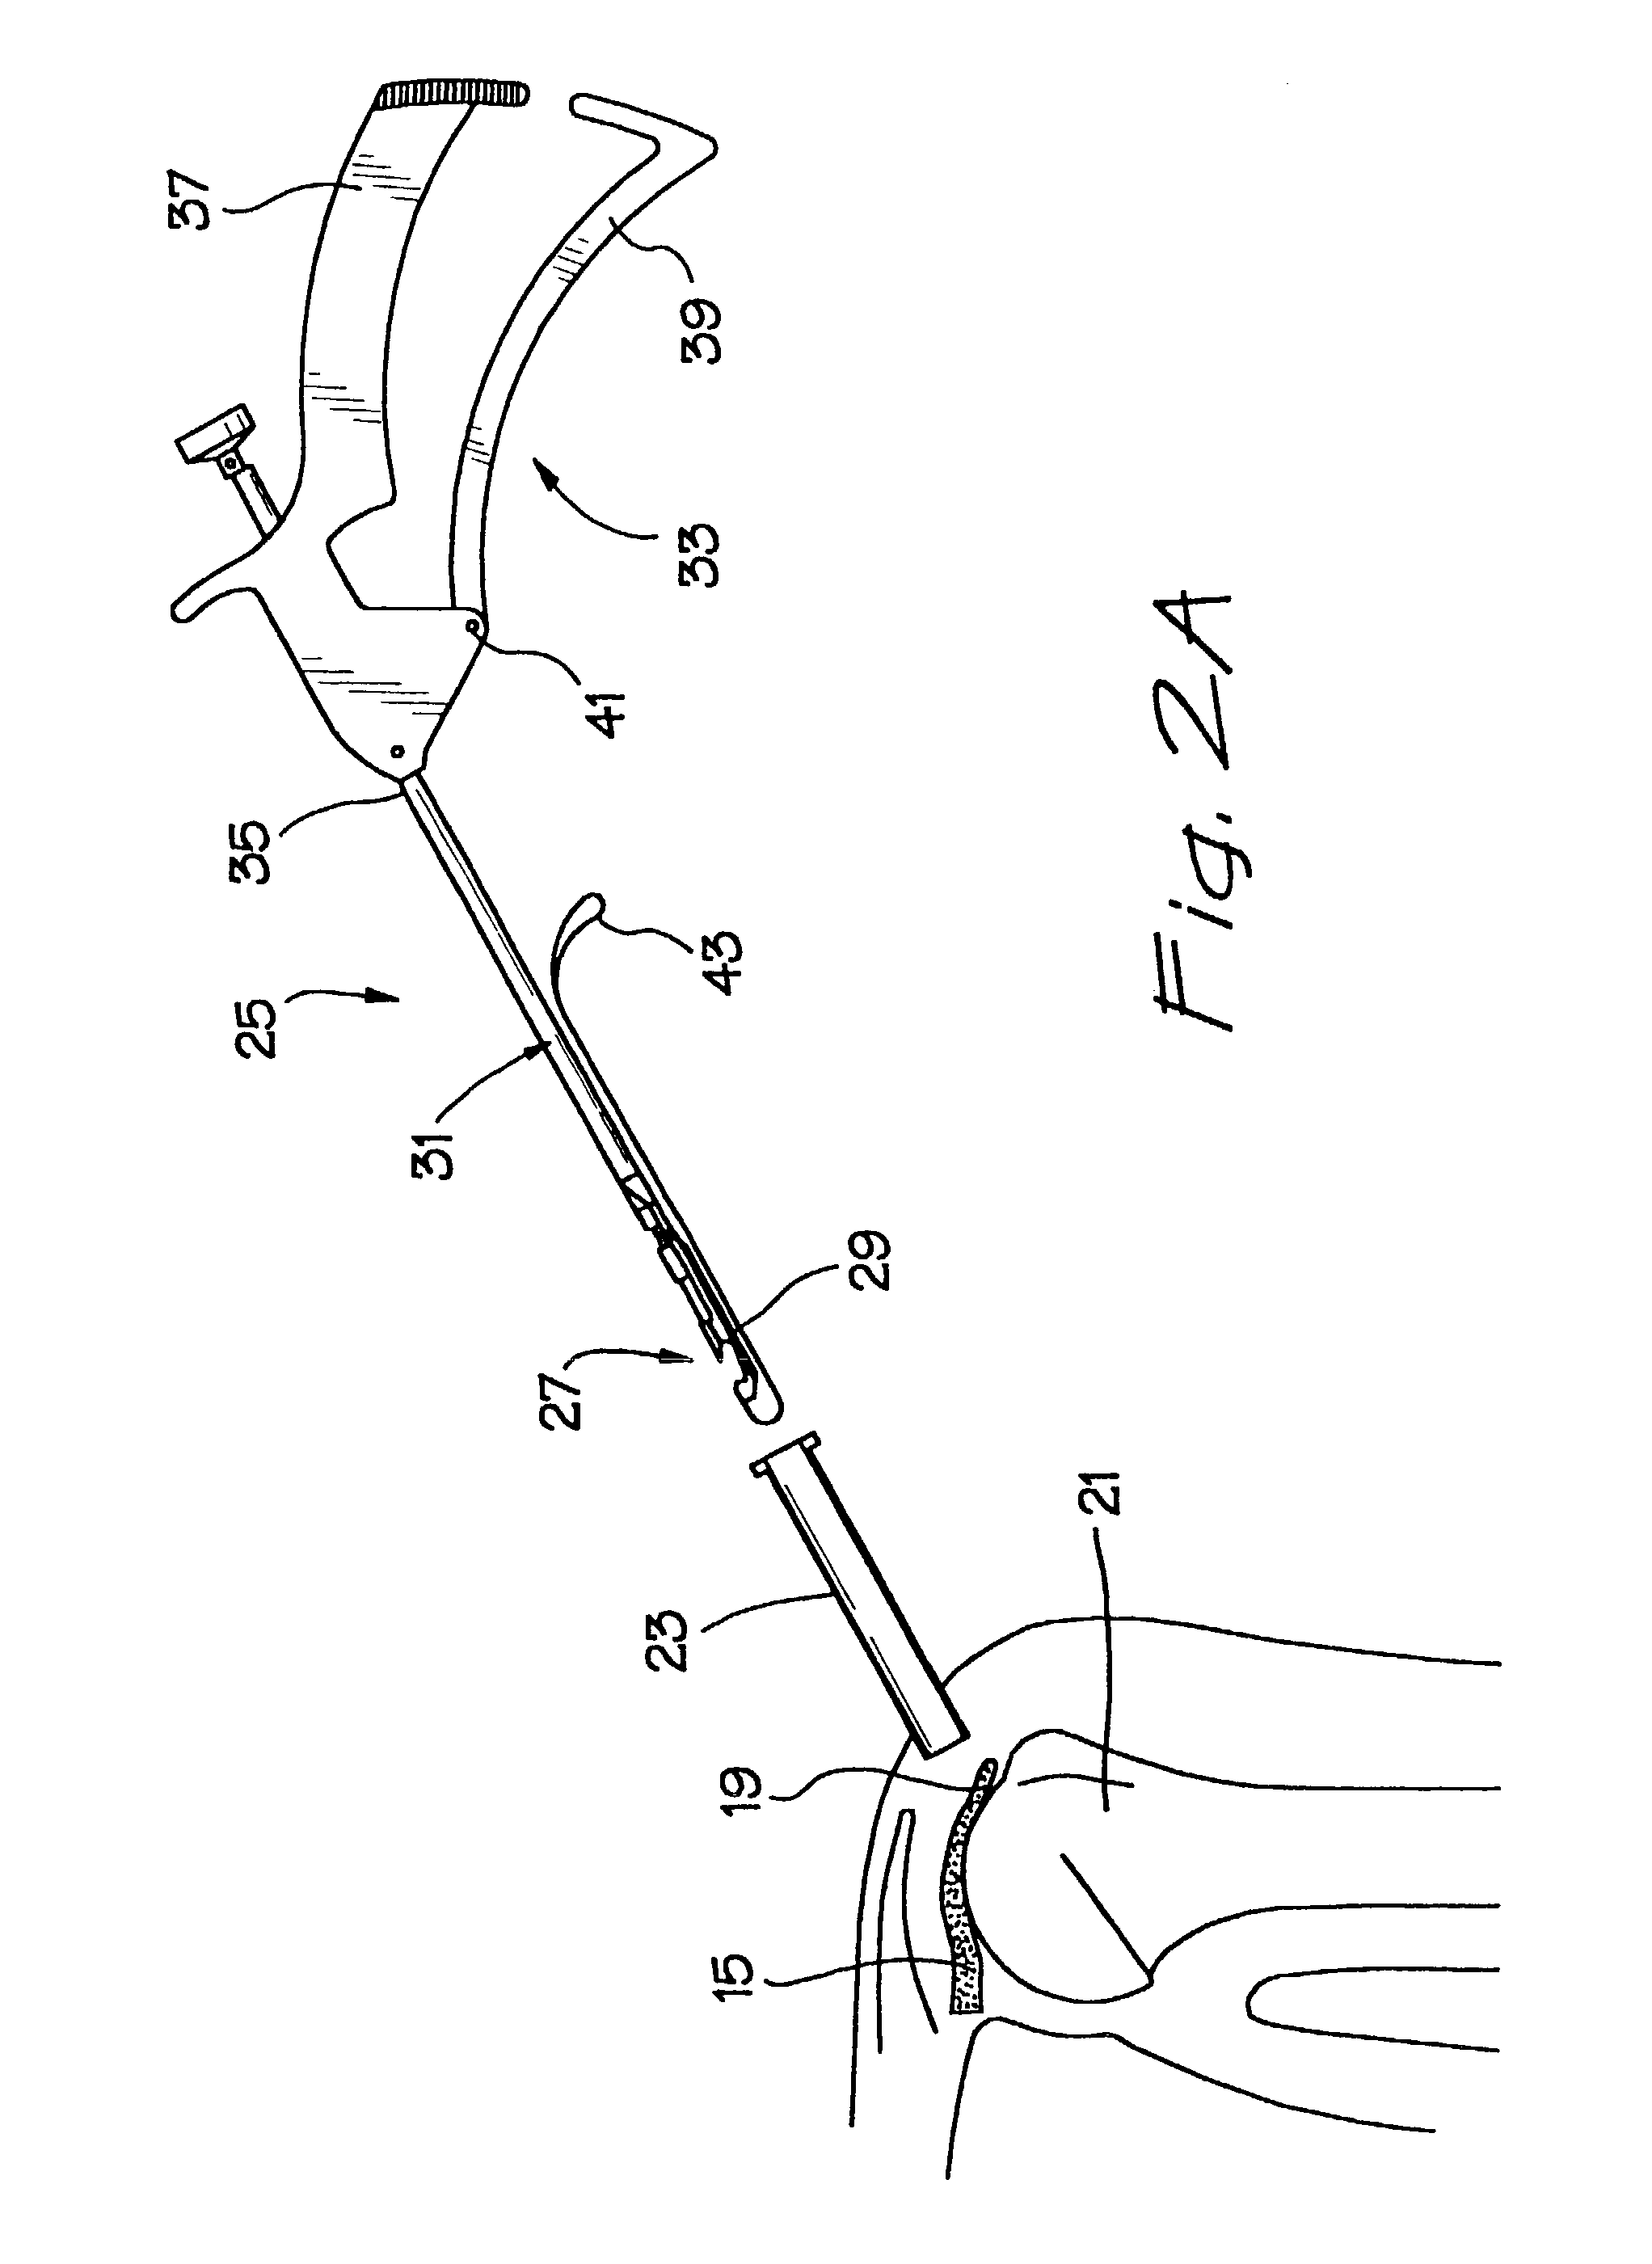 Linear suturing apparatus and methods